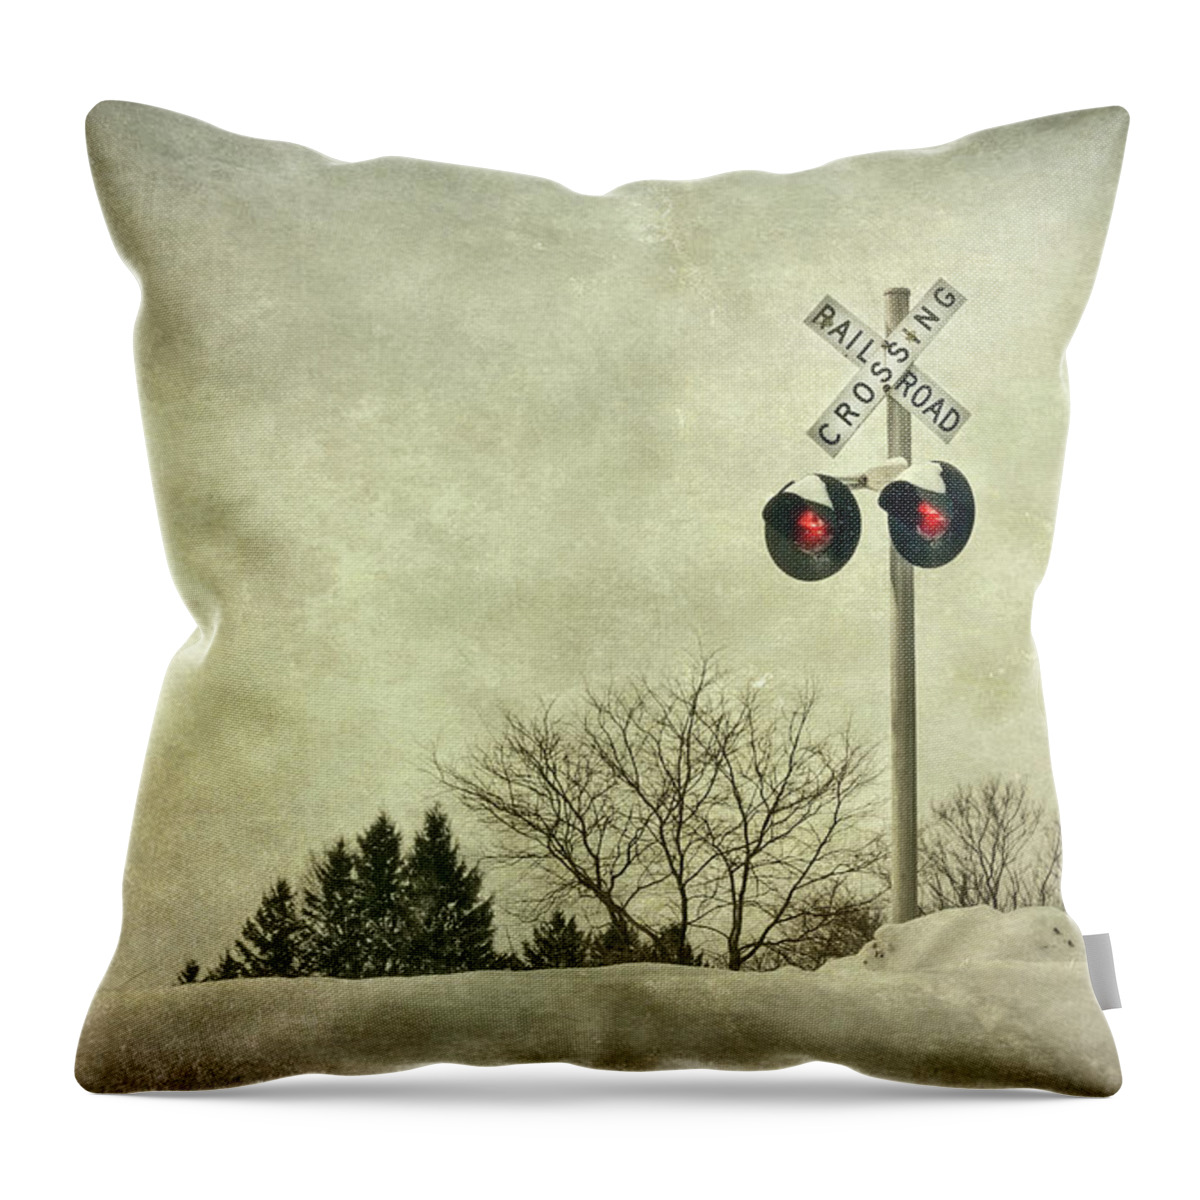 Rail Throw Pillow featuring the photograph Crossing Over by Evelina Kremsdorf